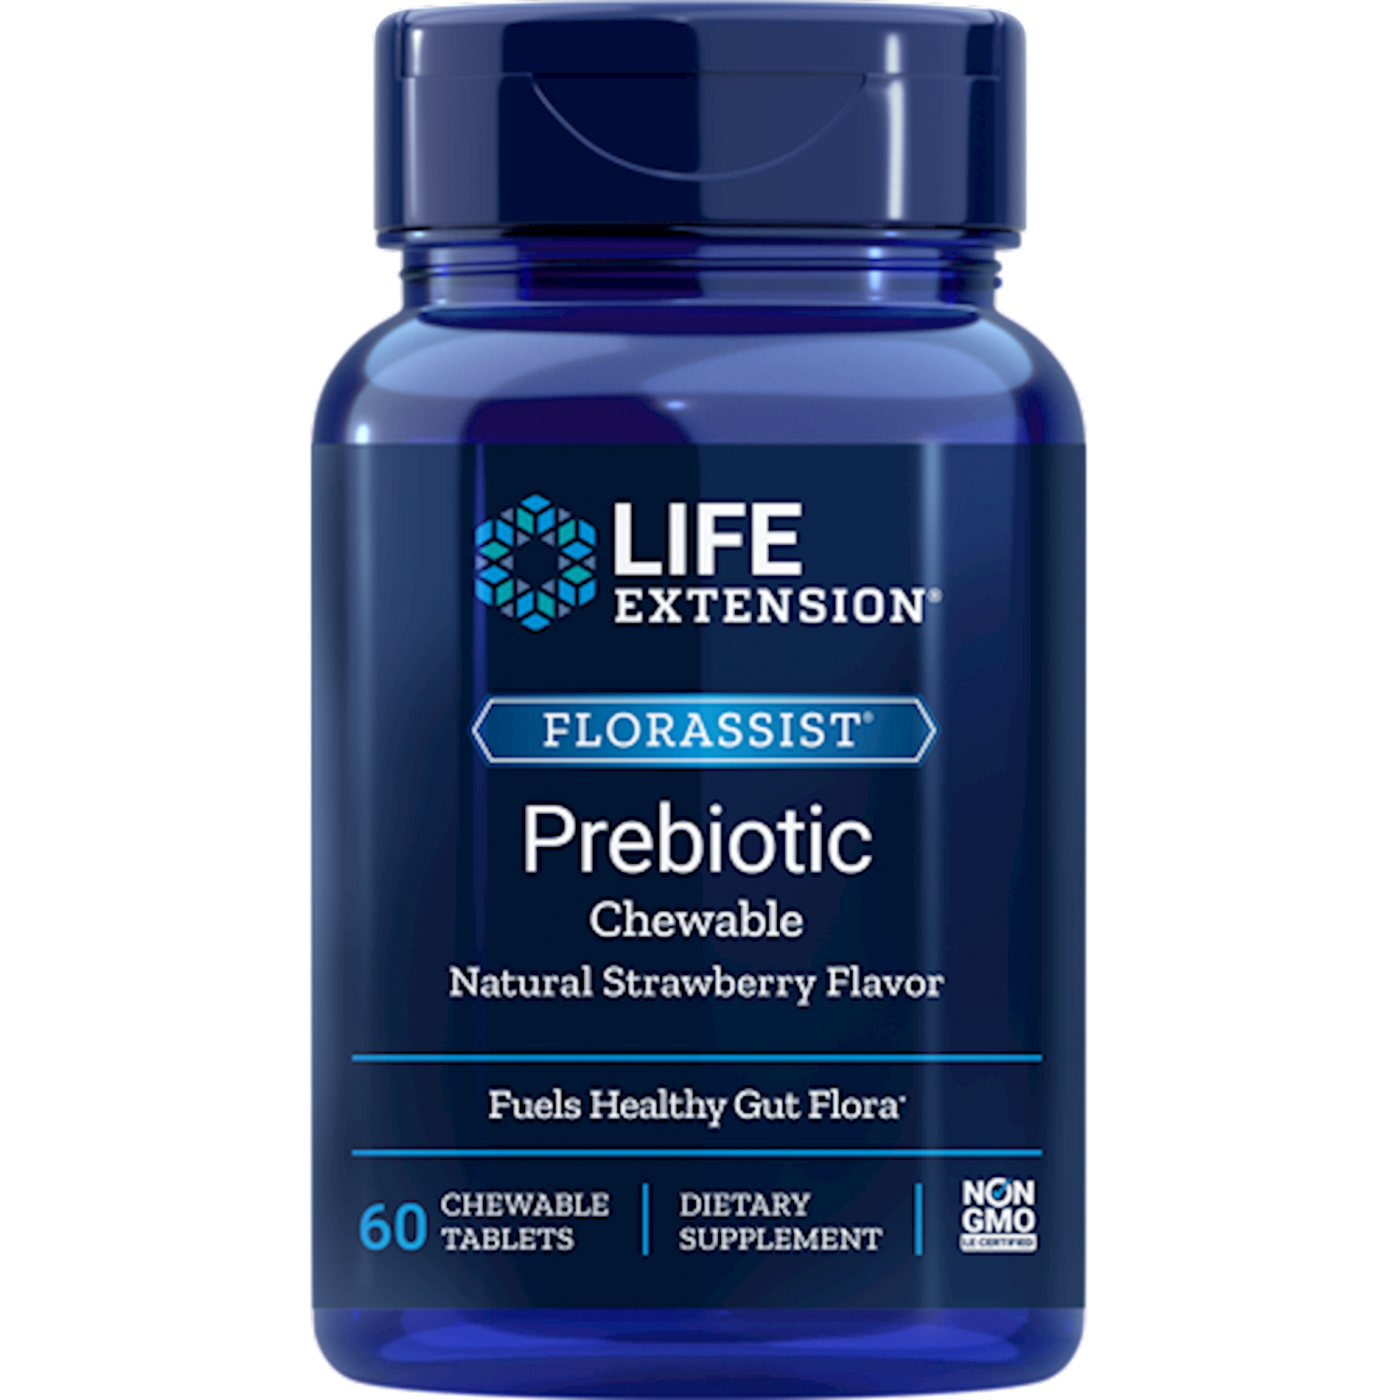 FLORASSIST Prebiotic Chewable 60 tabs Curated Wellness